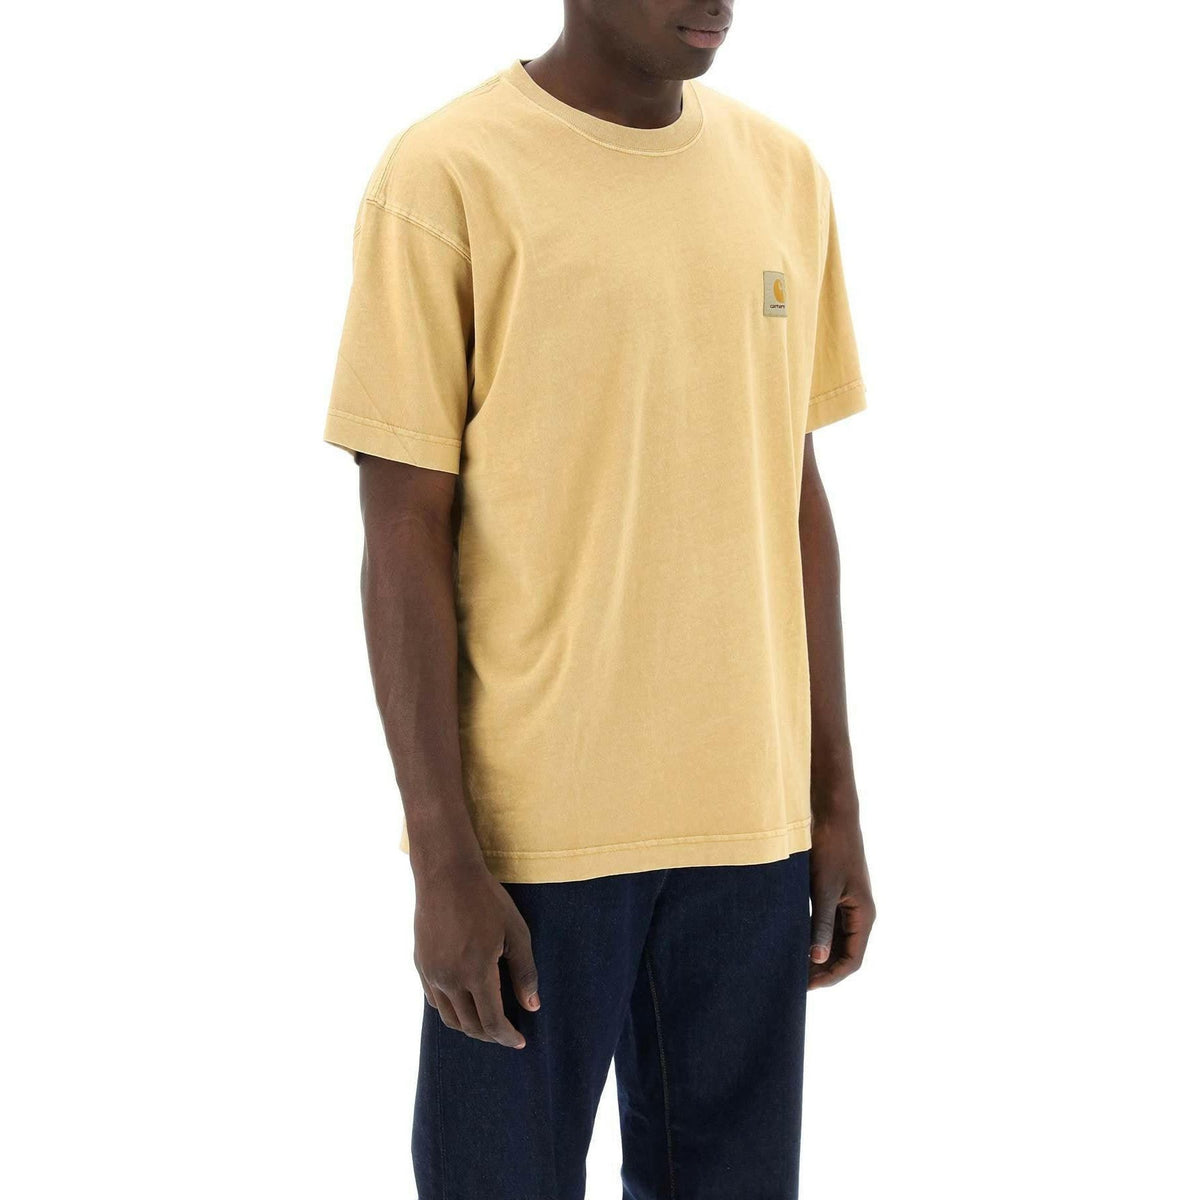 Bourbon Yellow Cotton Jersey T-Shirt With Lived-In Look CARHARTT WIP JOHN JULIA.